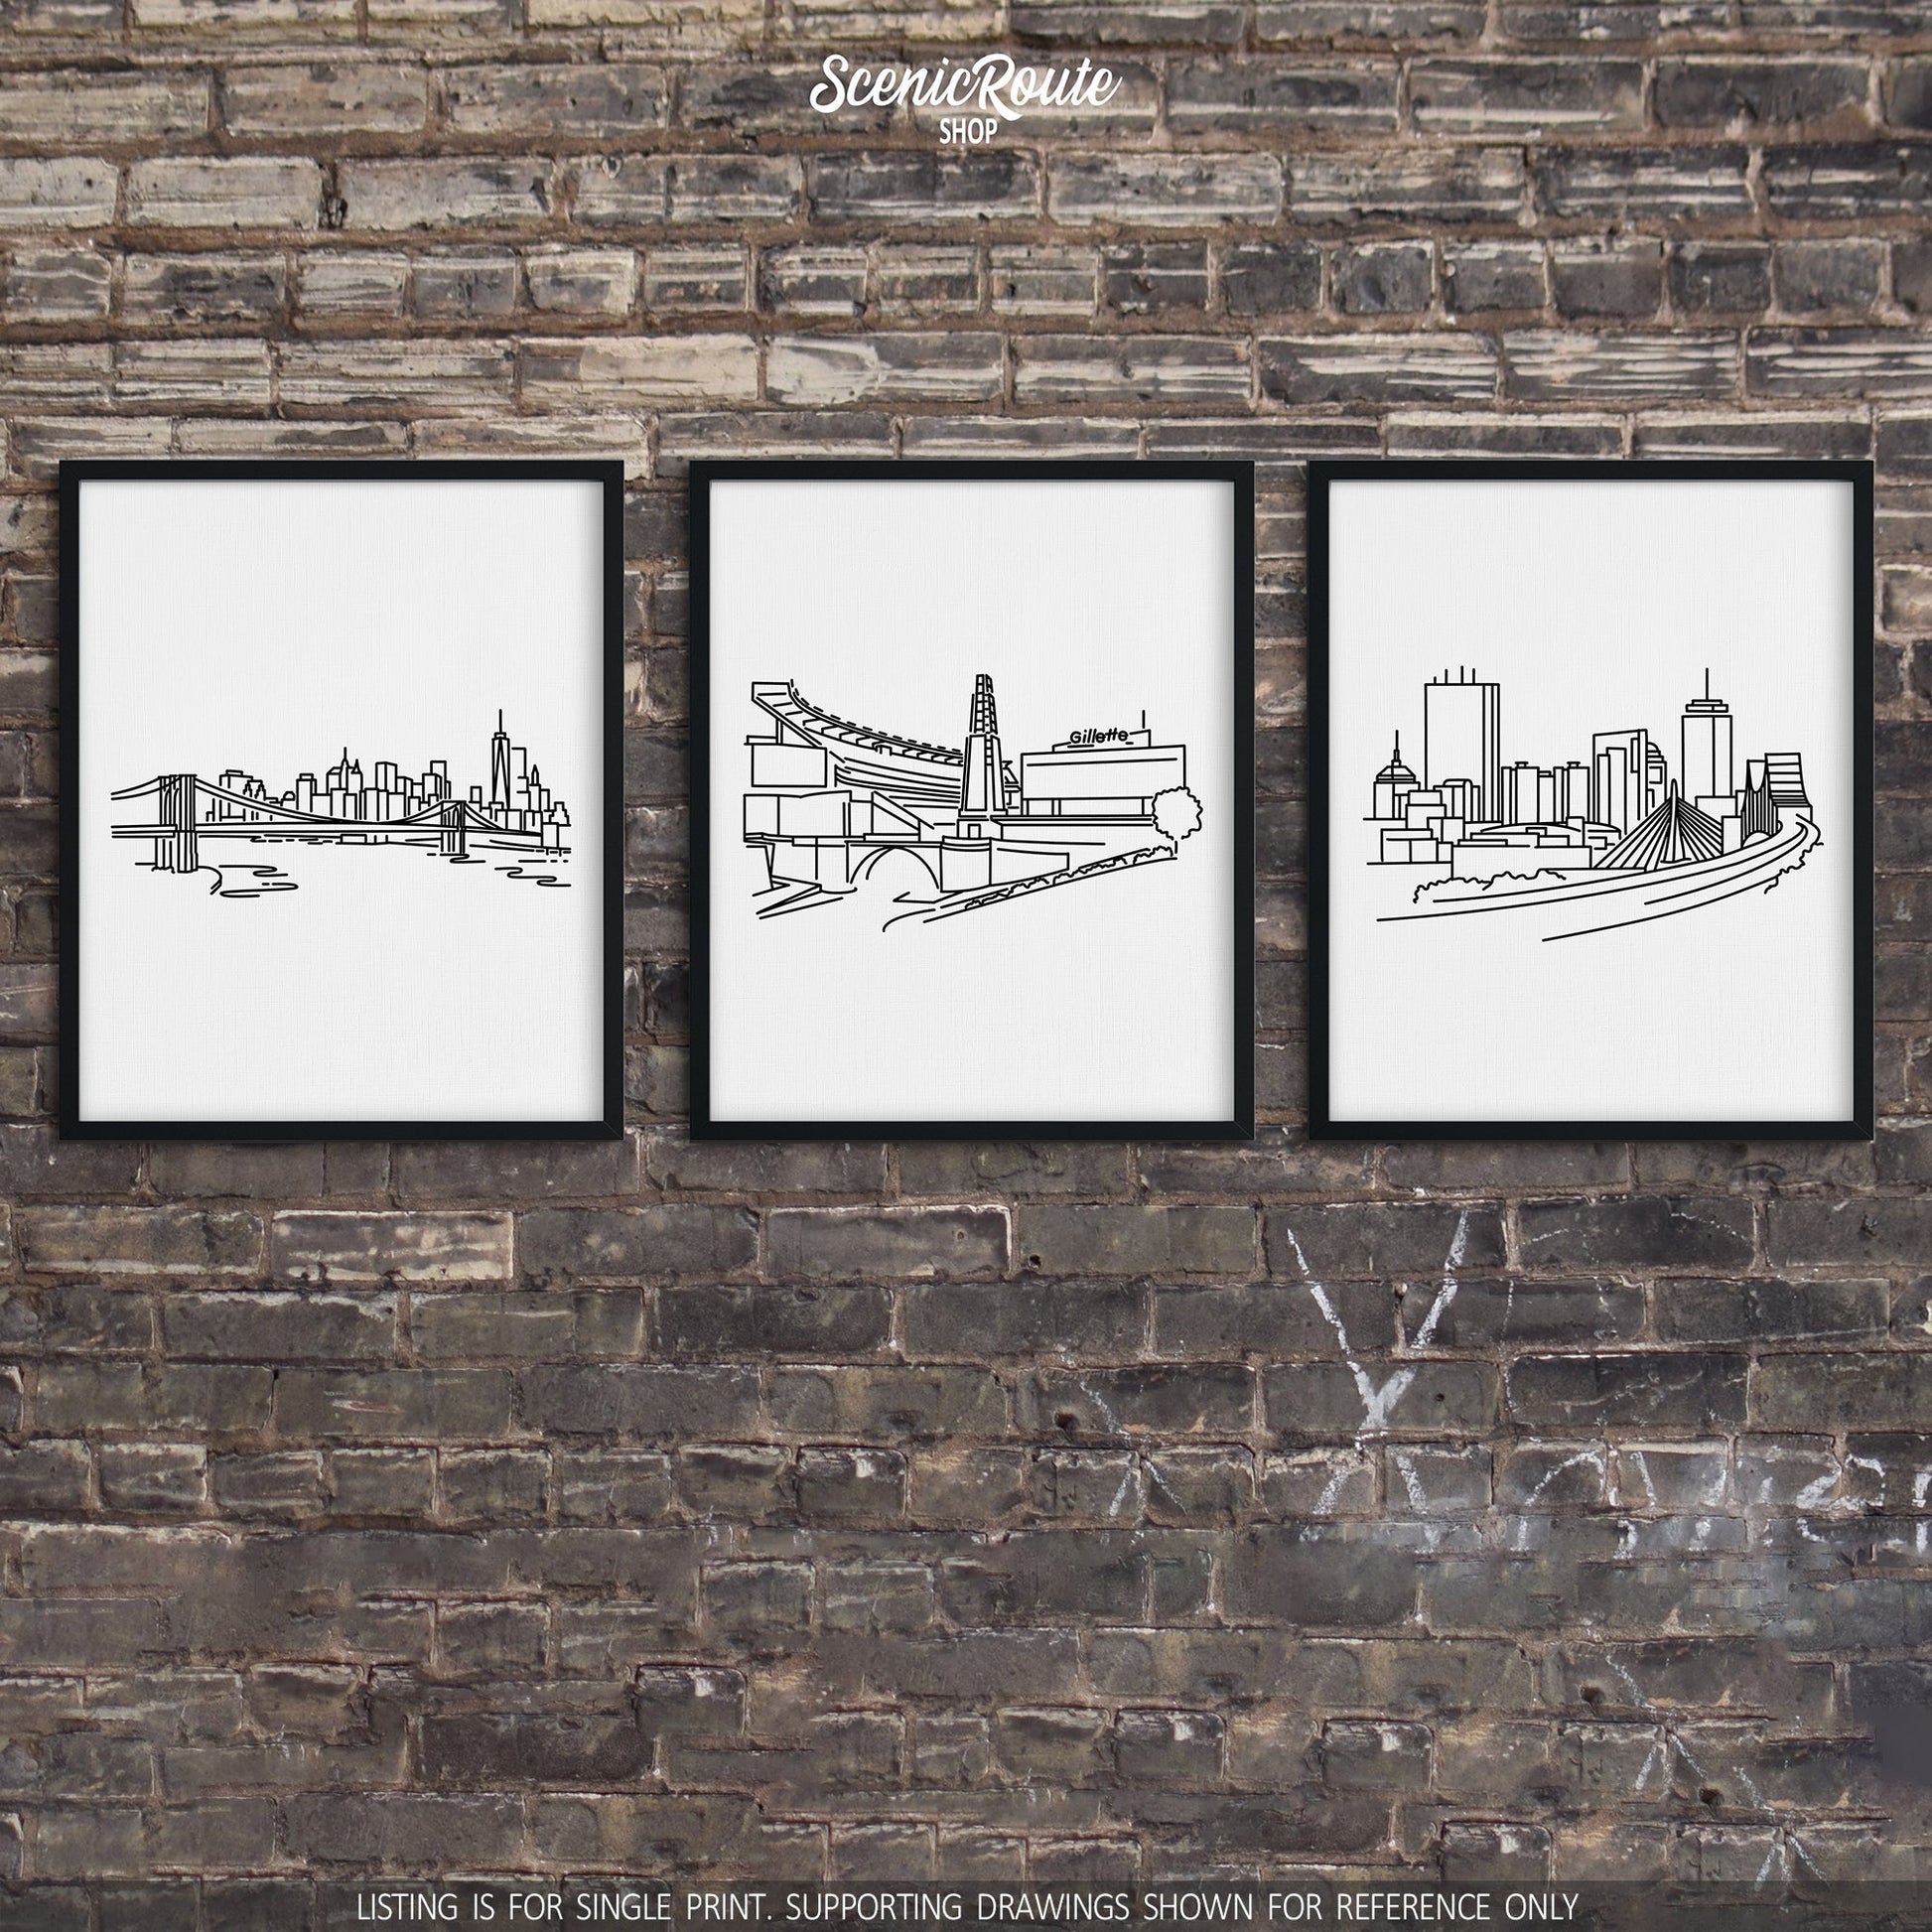 A group of three framed drawings on a brick wall. The line art drawings include the New York Skyline, Patriots Stadium, and Boston Skyline